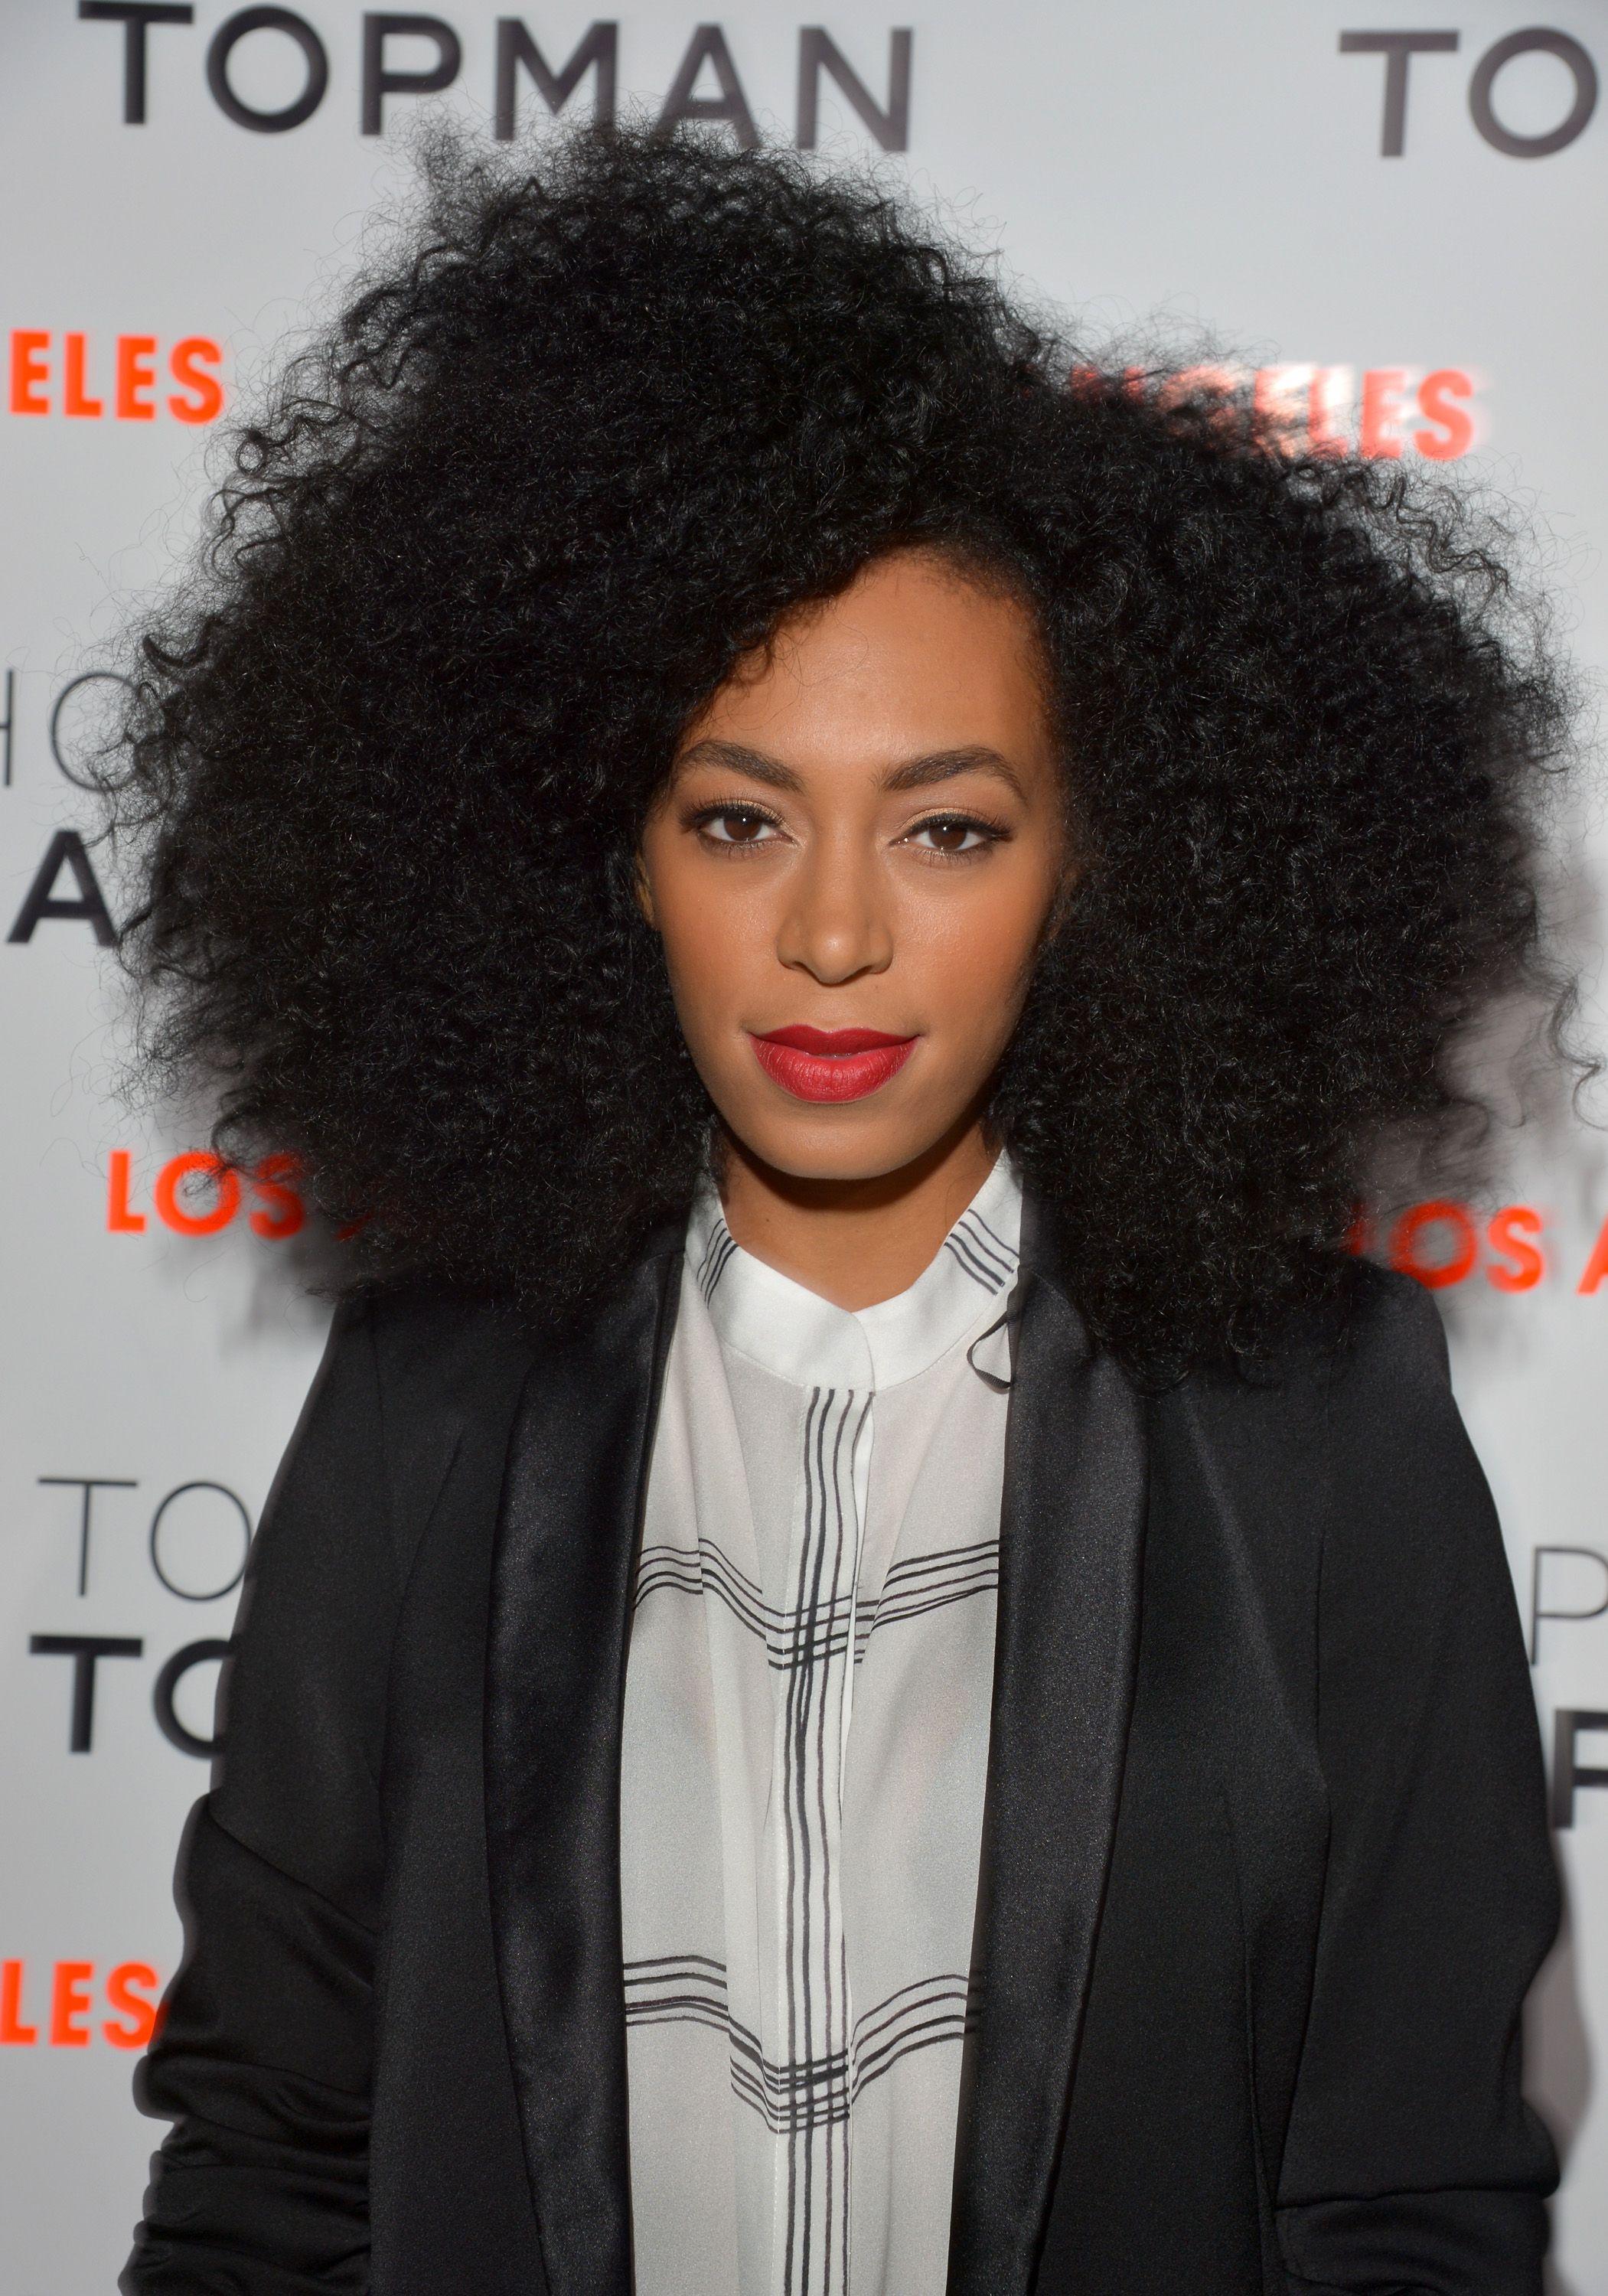 Solange Knowles Wallpaper High Quality